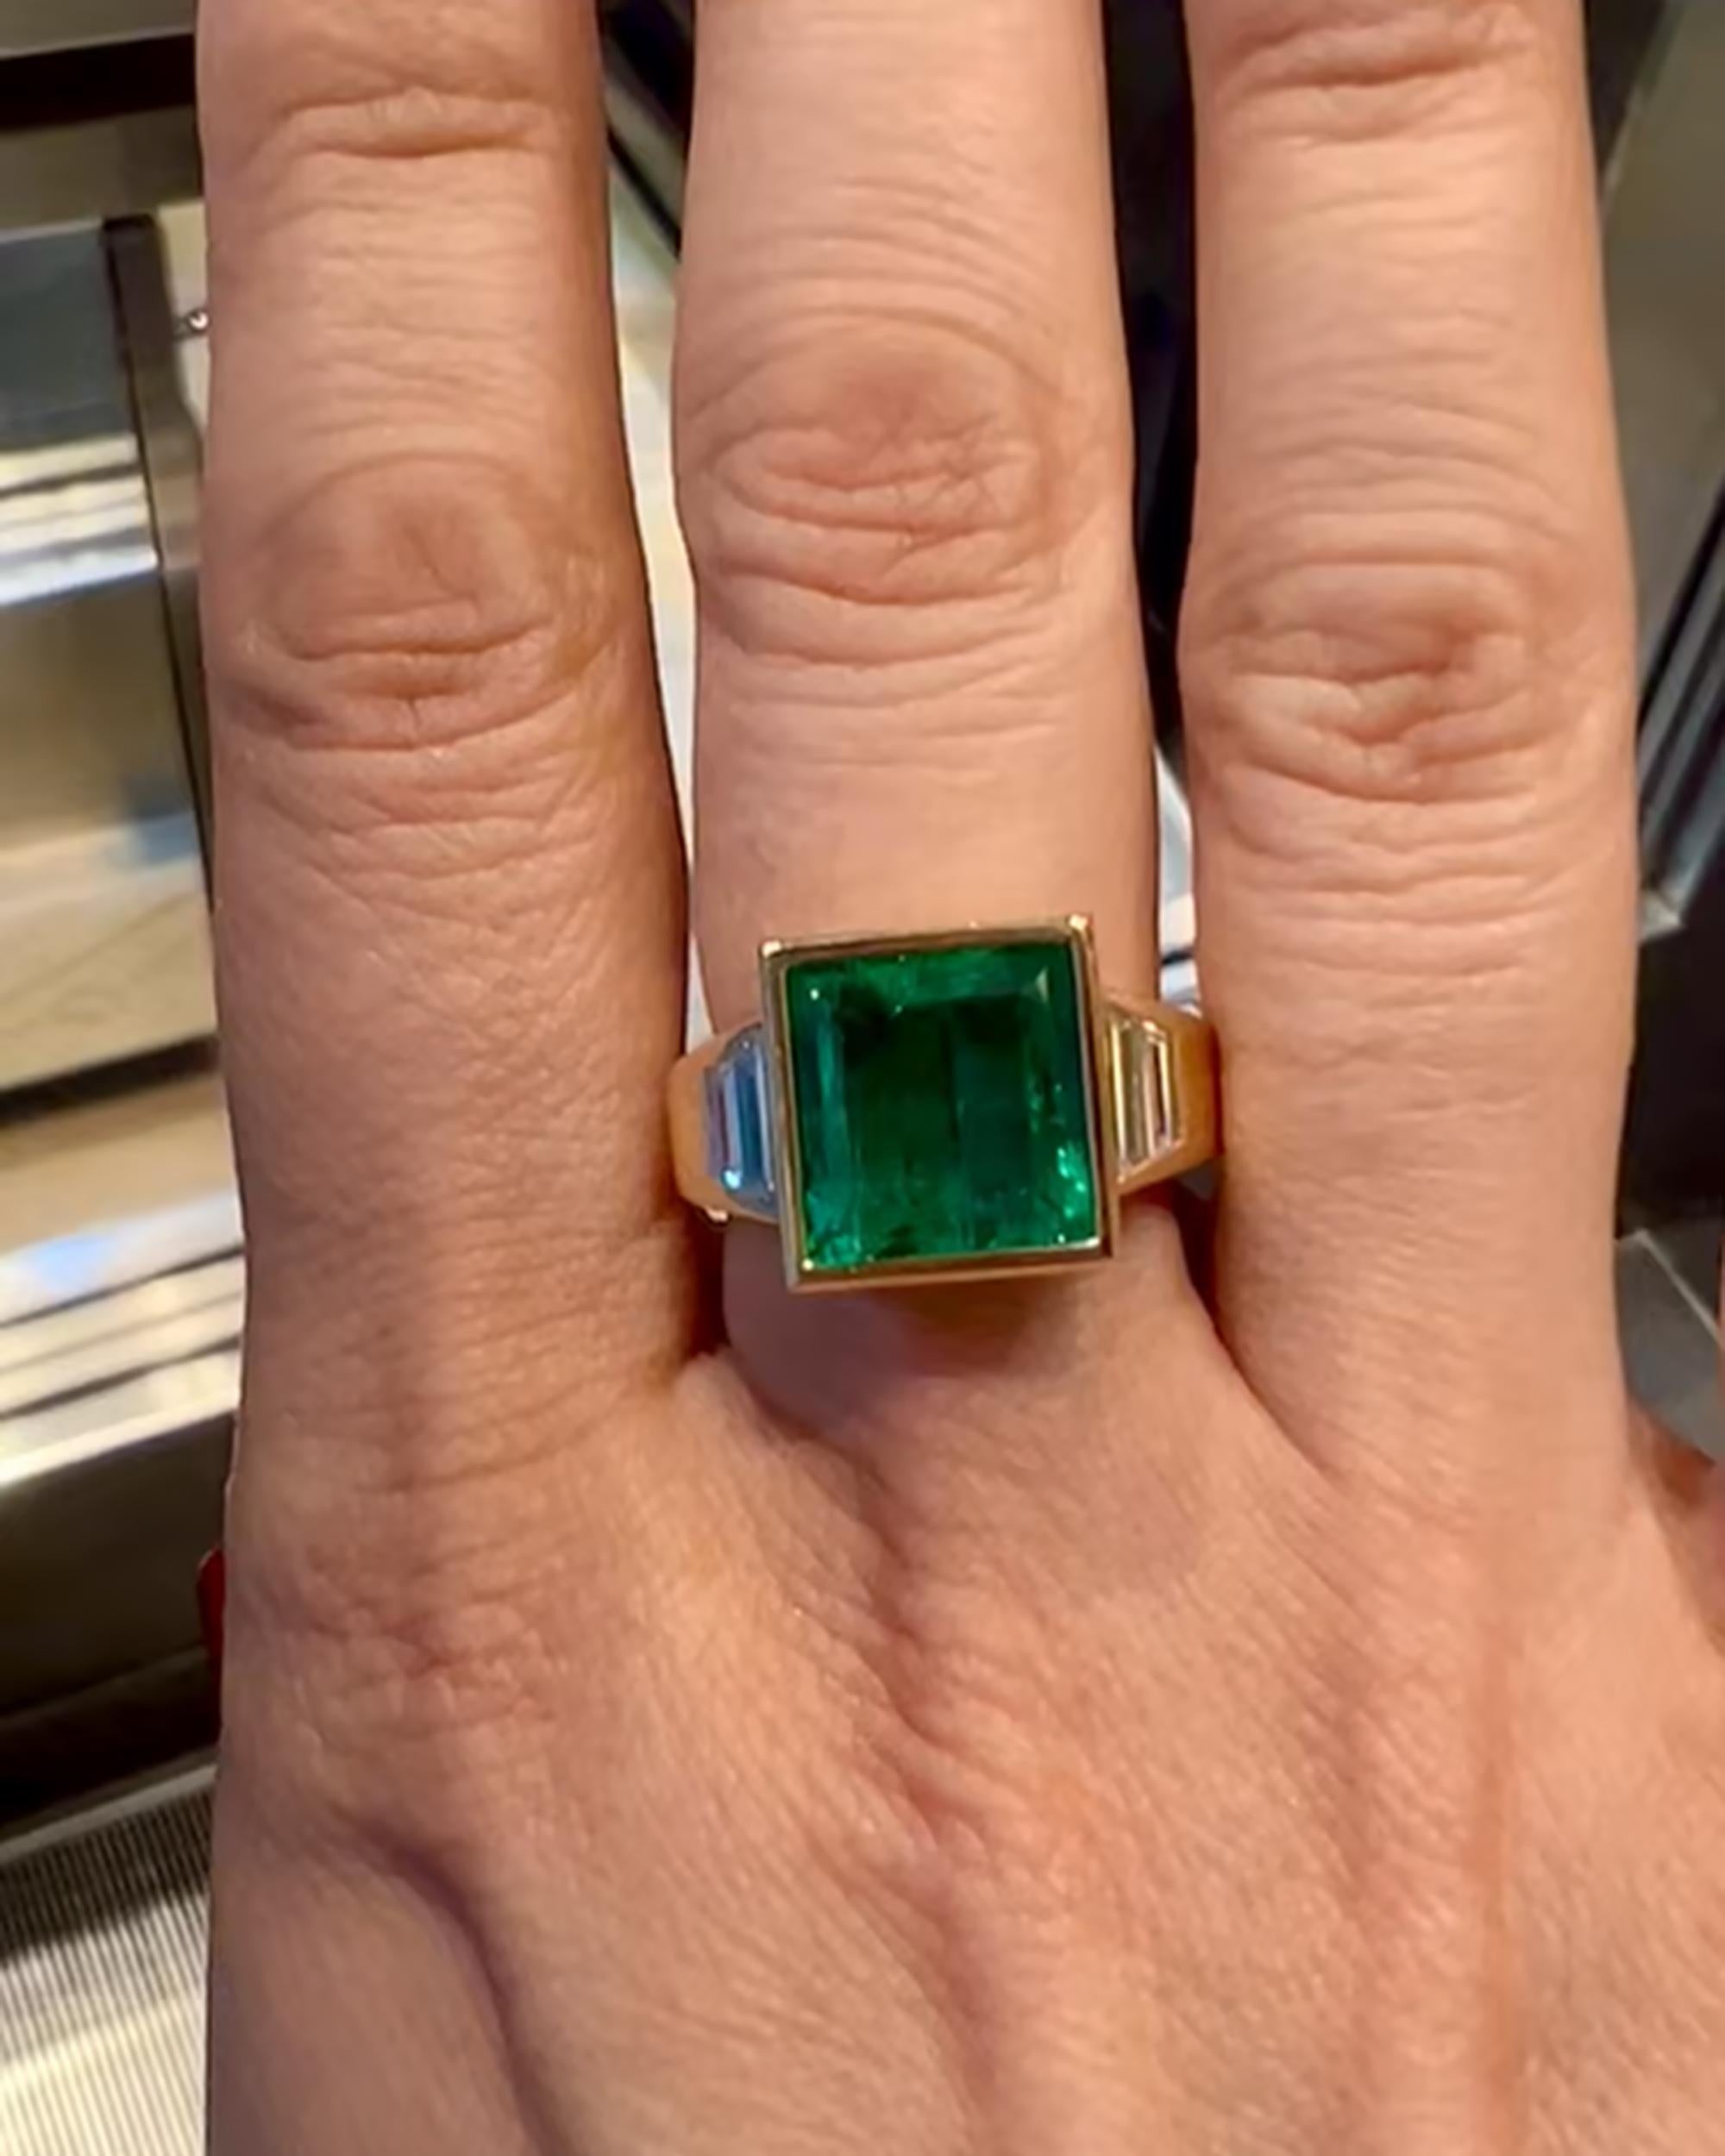 Contemporary Spectra Fine Jewelry GIA Certified 6.77 Carat Colombian Emerald Cocktail Ring For Sale